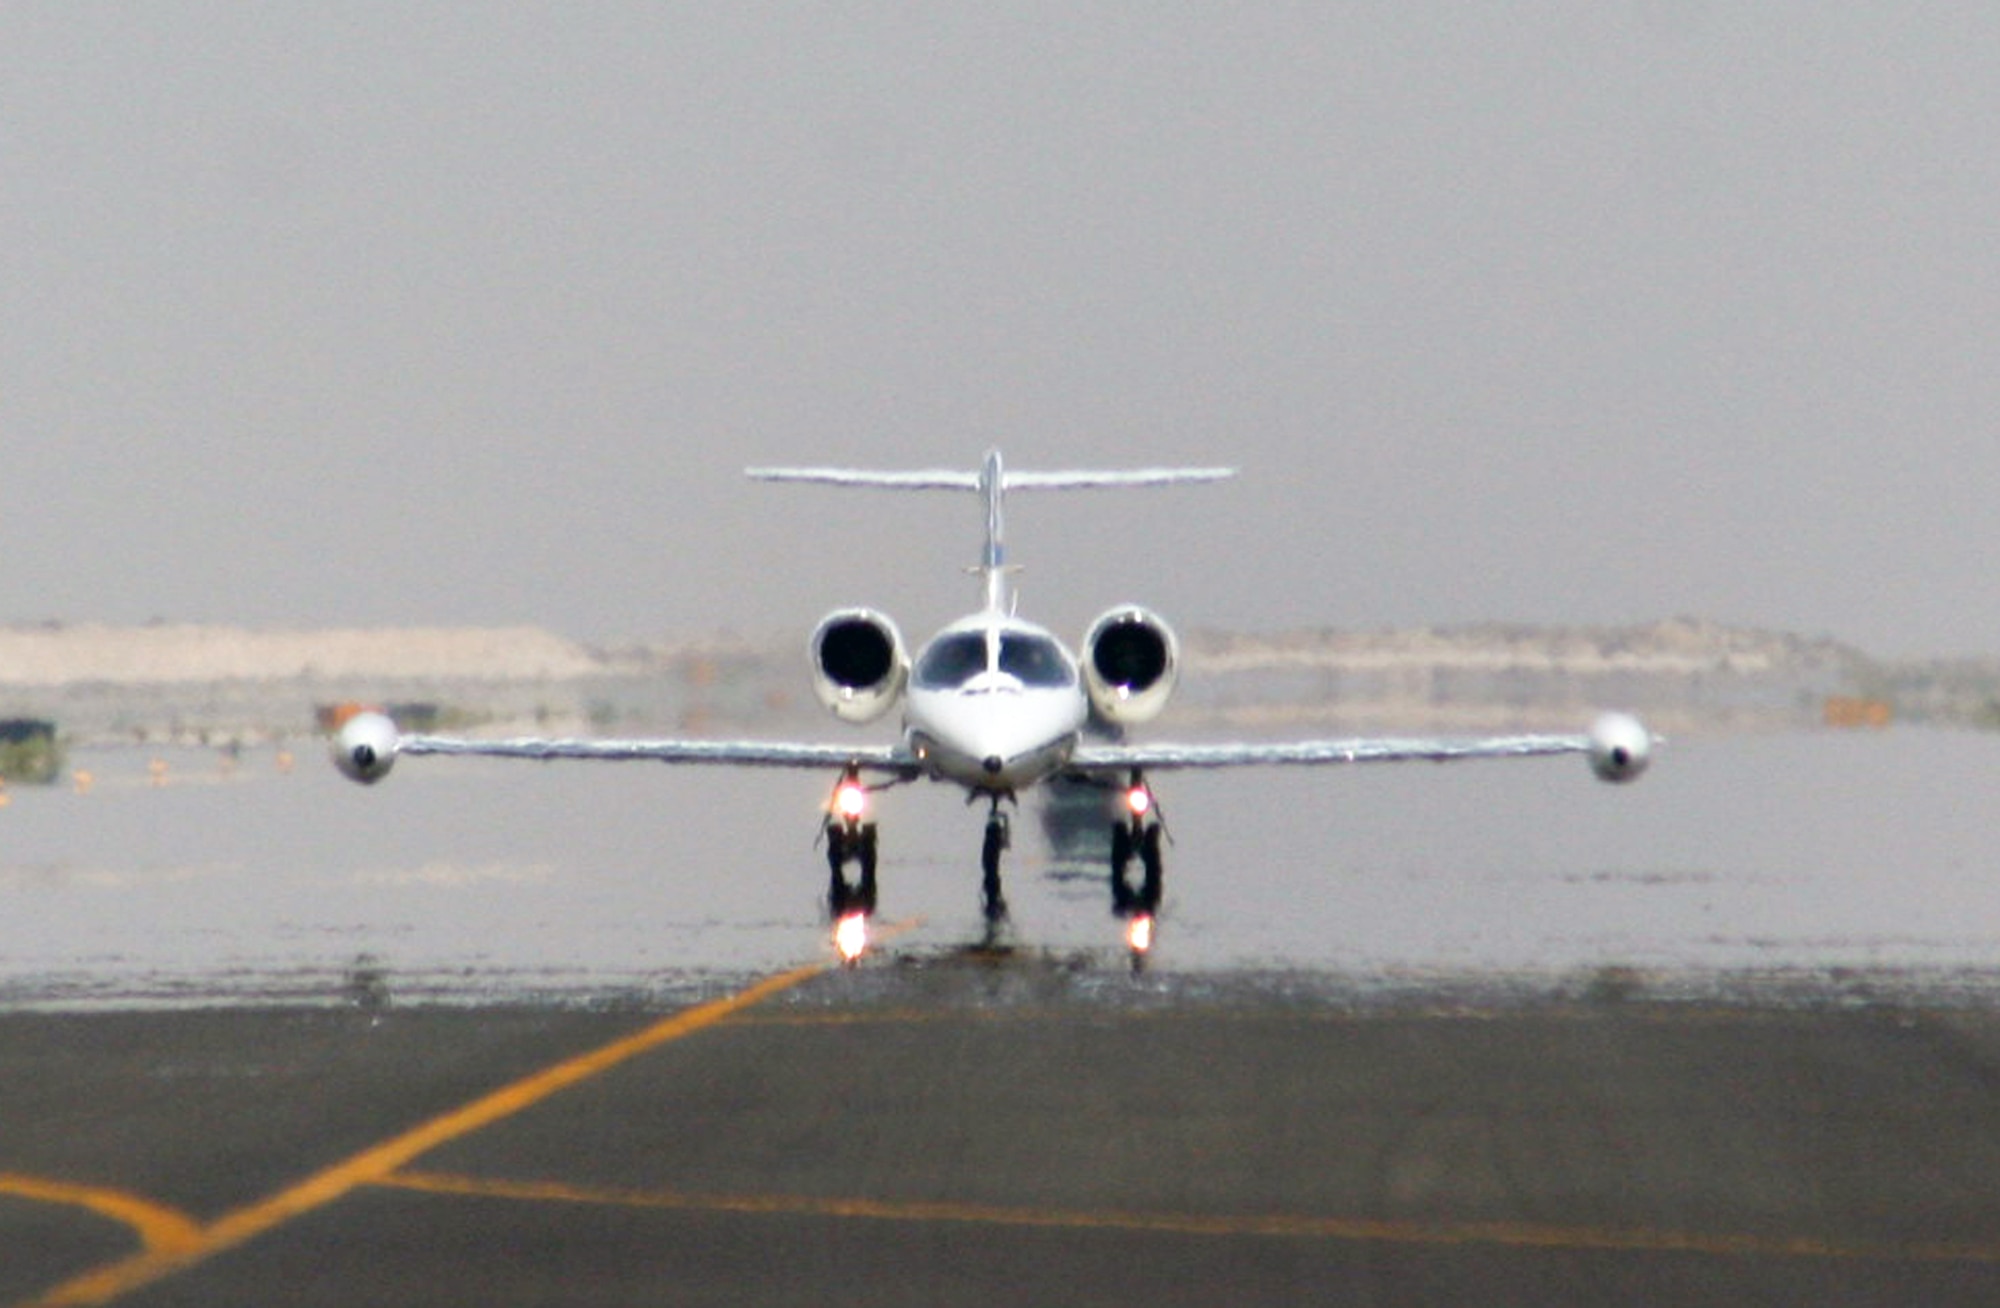 A C-21 passenger jet taxis on the runway to the flightline of the 380th Air Expeditionary Wing at a non-disclosed location in Southwest Asia on May 19, 2010.  The C-21, according to its Air Force fact sheet, is a twin turbofan engine aircraft used for cargo and passenger airlift. The aircraft is the military version of the Lear Jet 35A business jet. In addition to providing cargo and passenger airlift, the aircraft is capable of transporting one litter or five ambulatory patients during aeromedical evacuations. The C-21 can carry eight passengers and 42 cubic feet (1.26 cubic meters) of cargo. (U.S. Air Force Photo/Master Sgt. Scott T. Sturkol/Released)